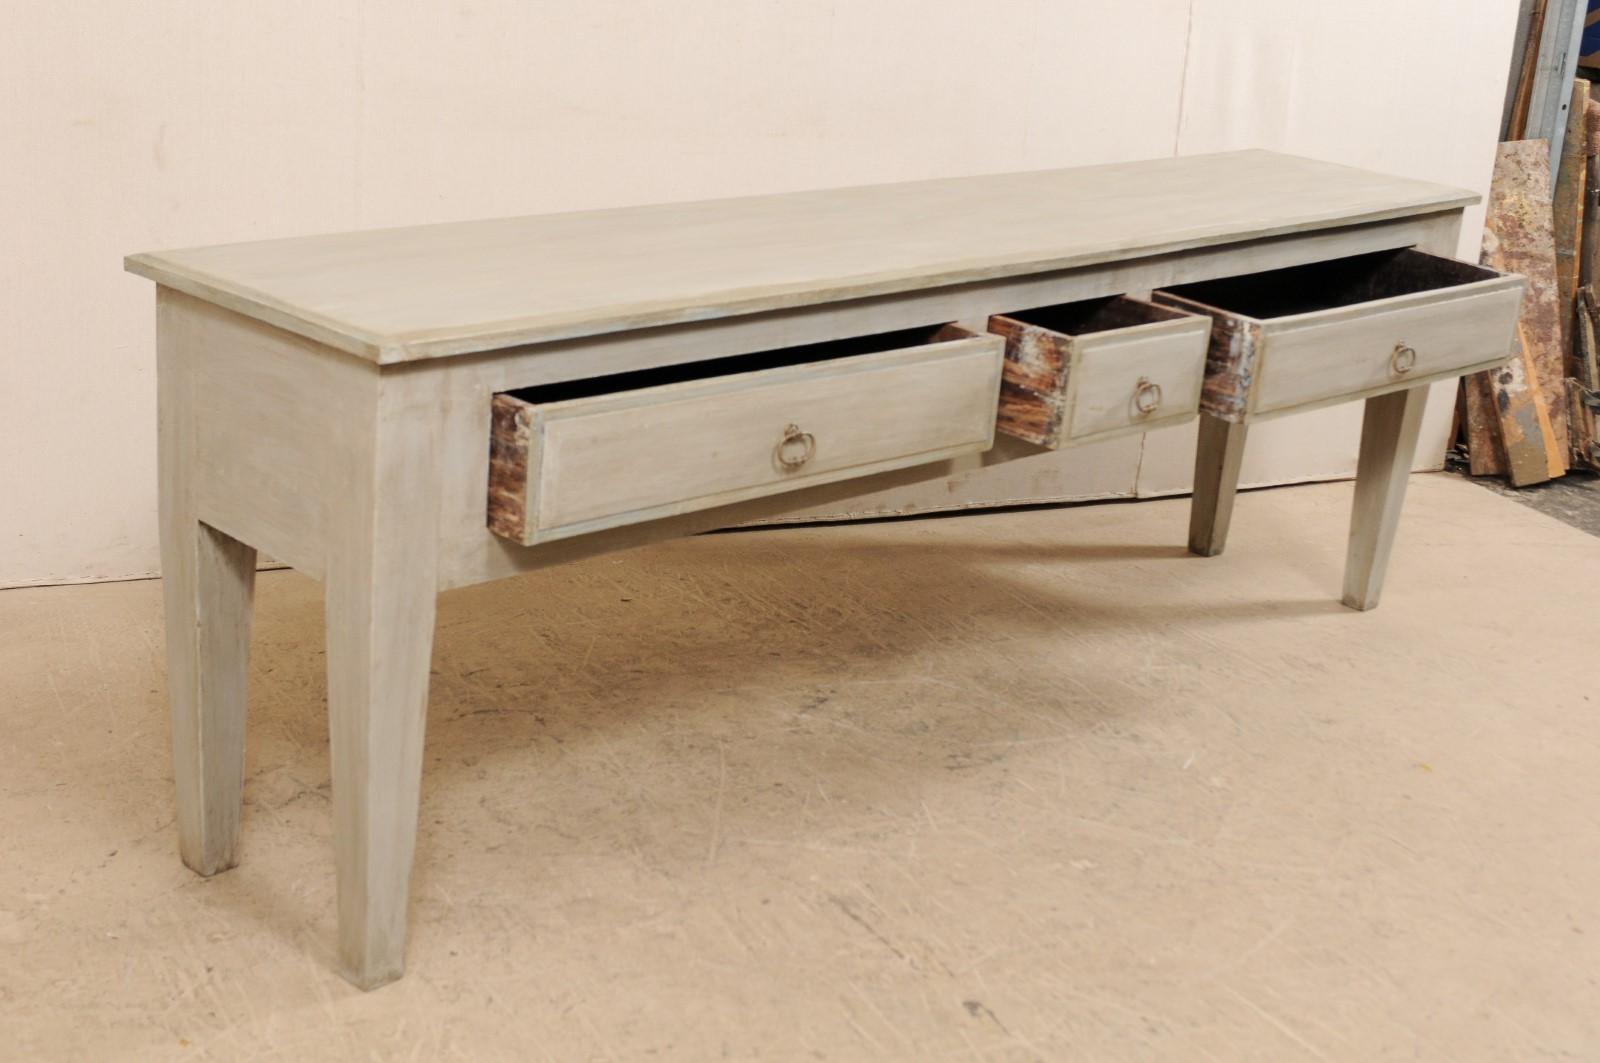 Long Brazilian Painted Wood Console Table with Nice Clean Lines 3